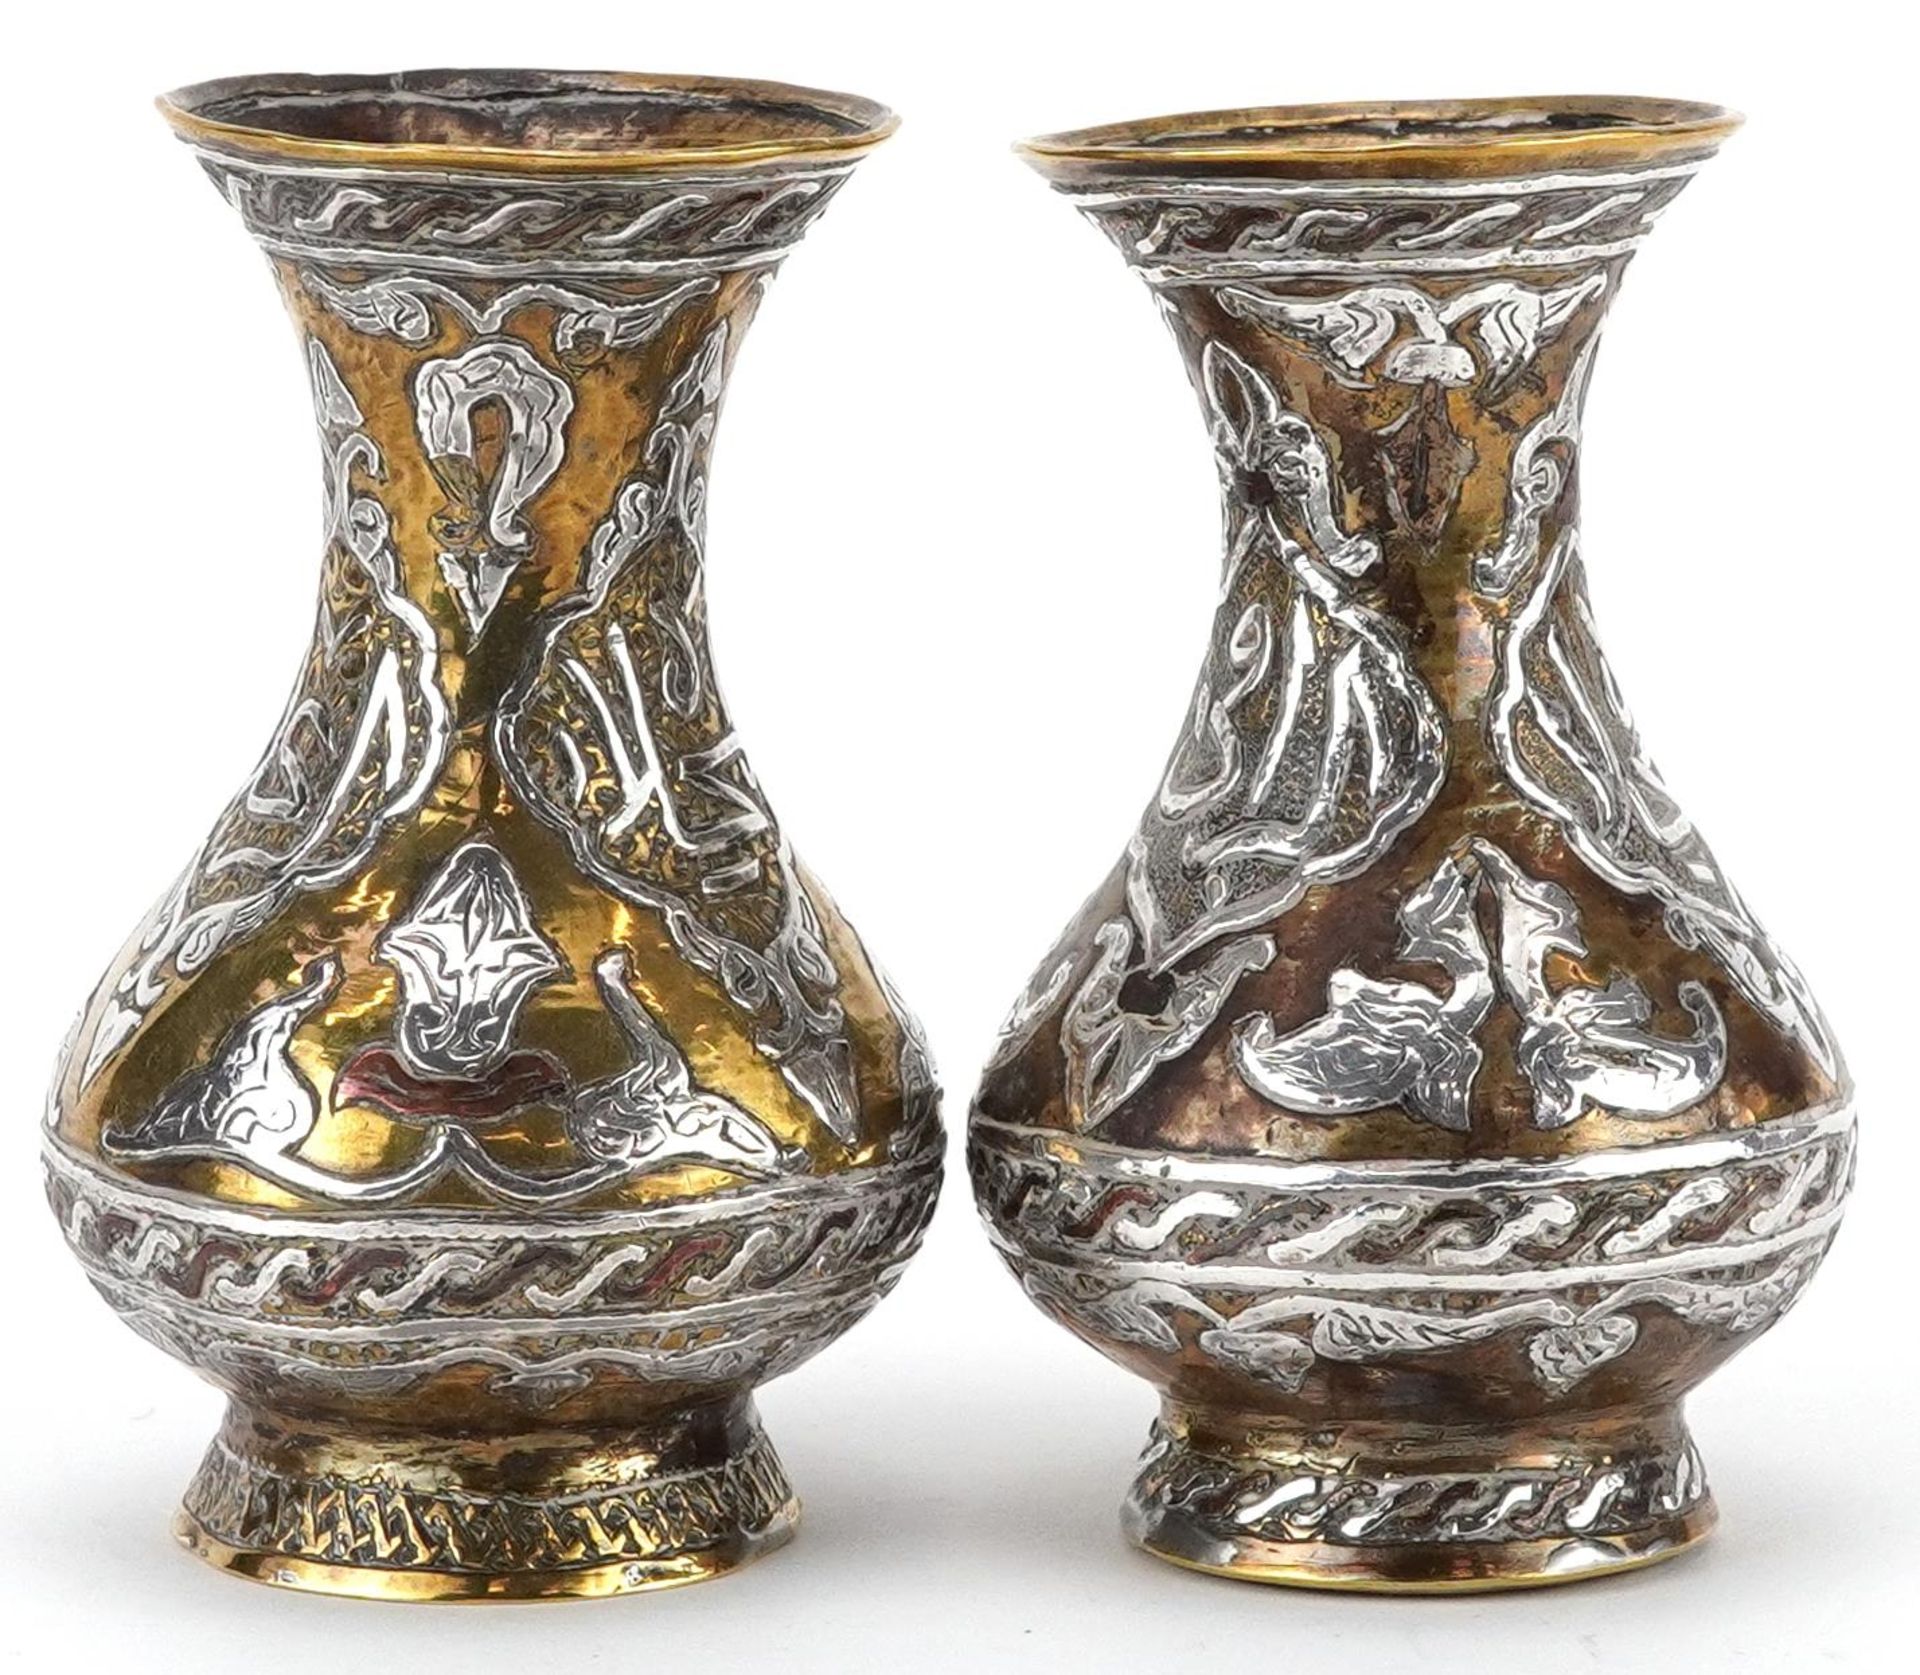 Pair of Islamic brass vases with silver foliate inlay, each 10cm high - Image 3 of 6